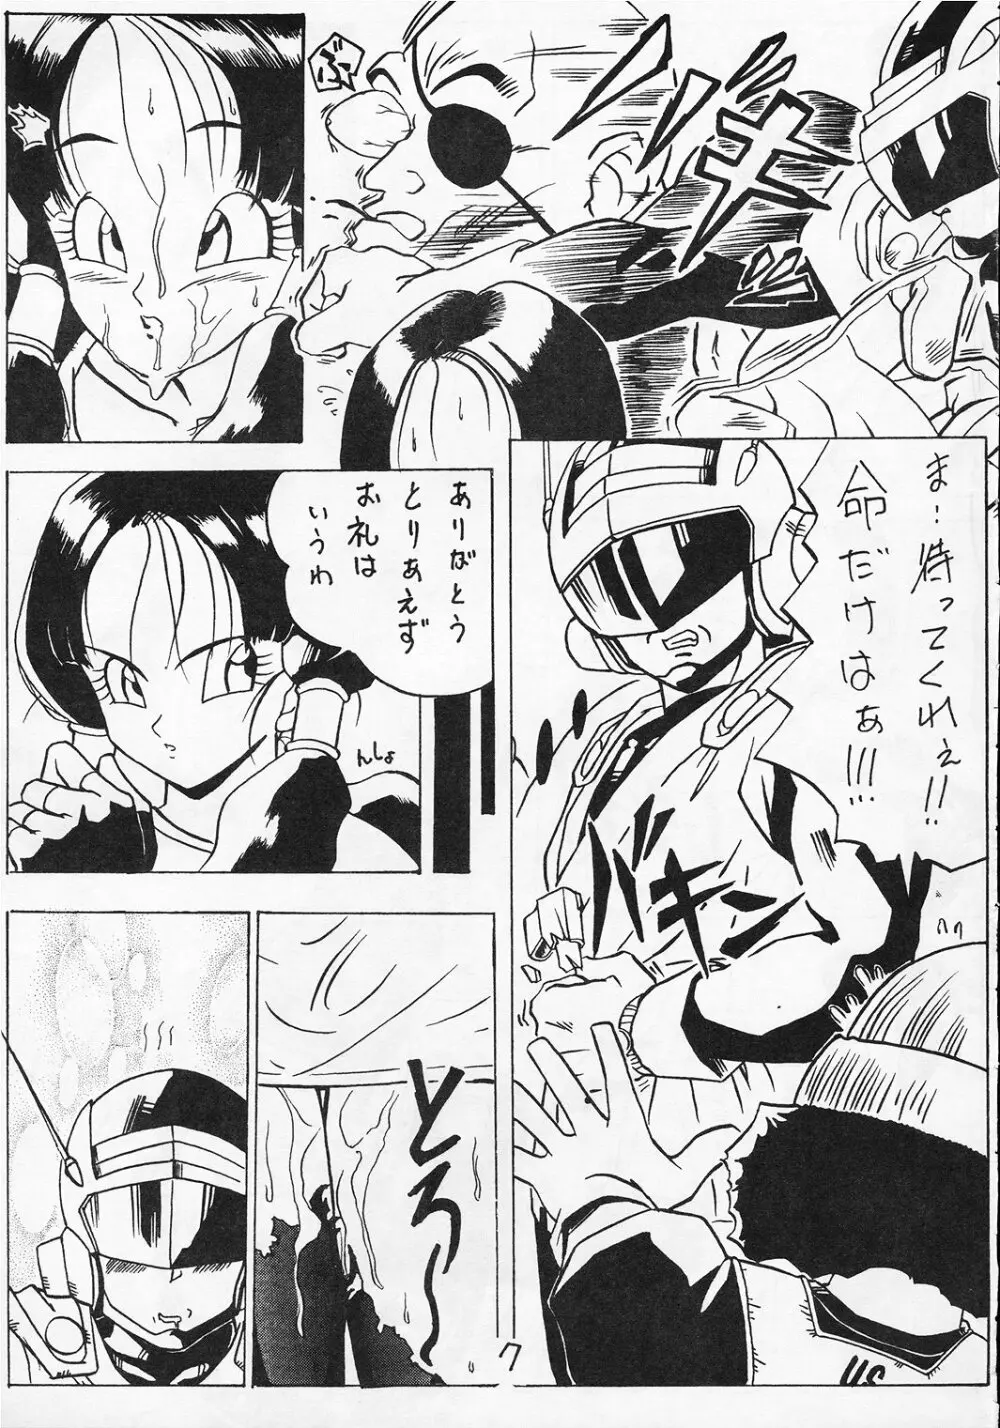 GO GO 18号 - page6